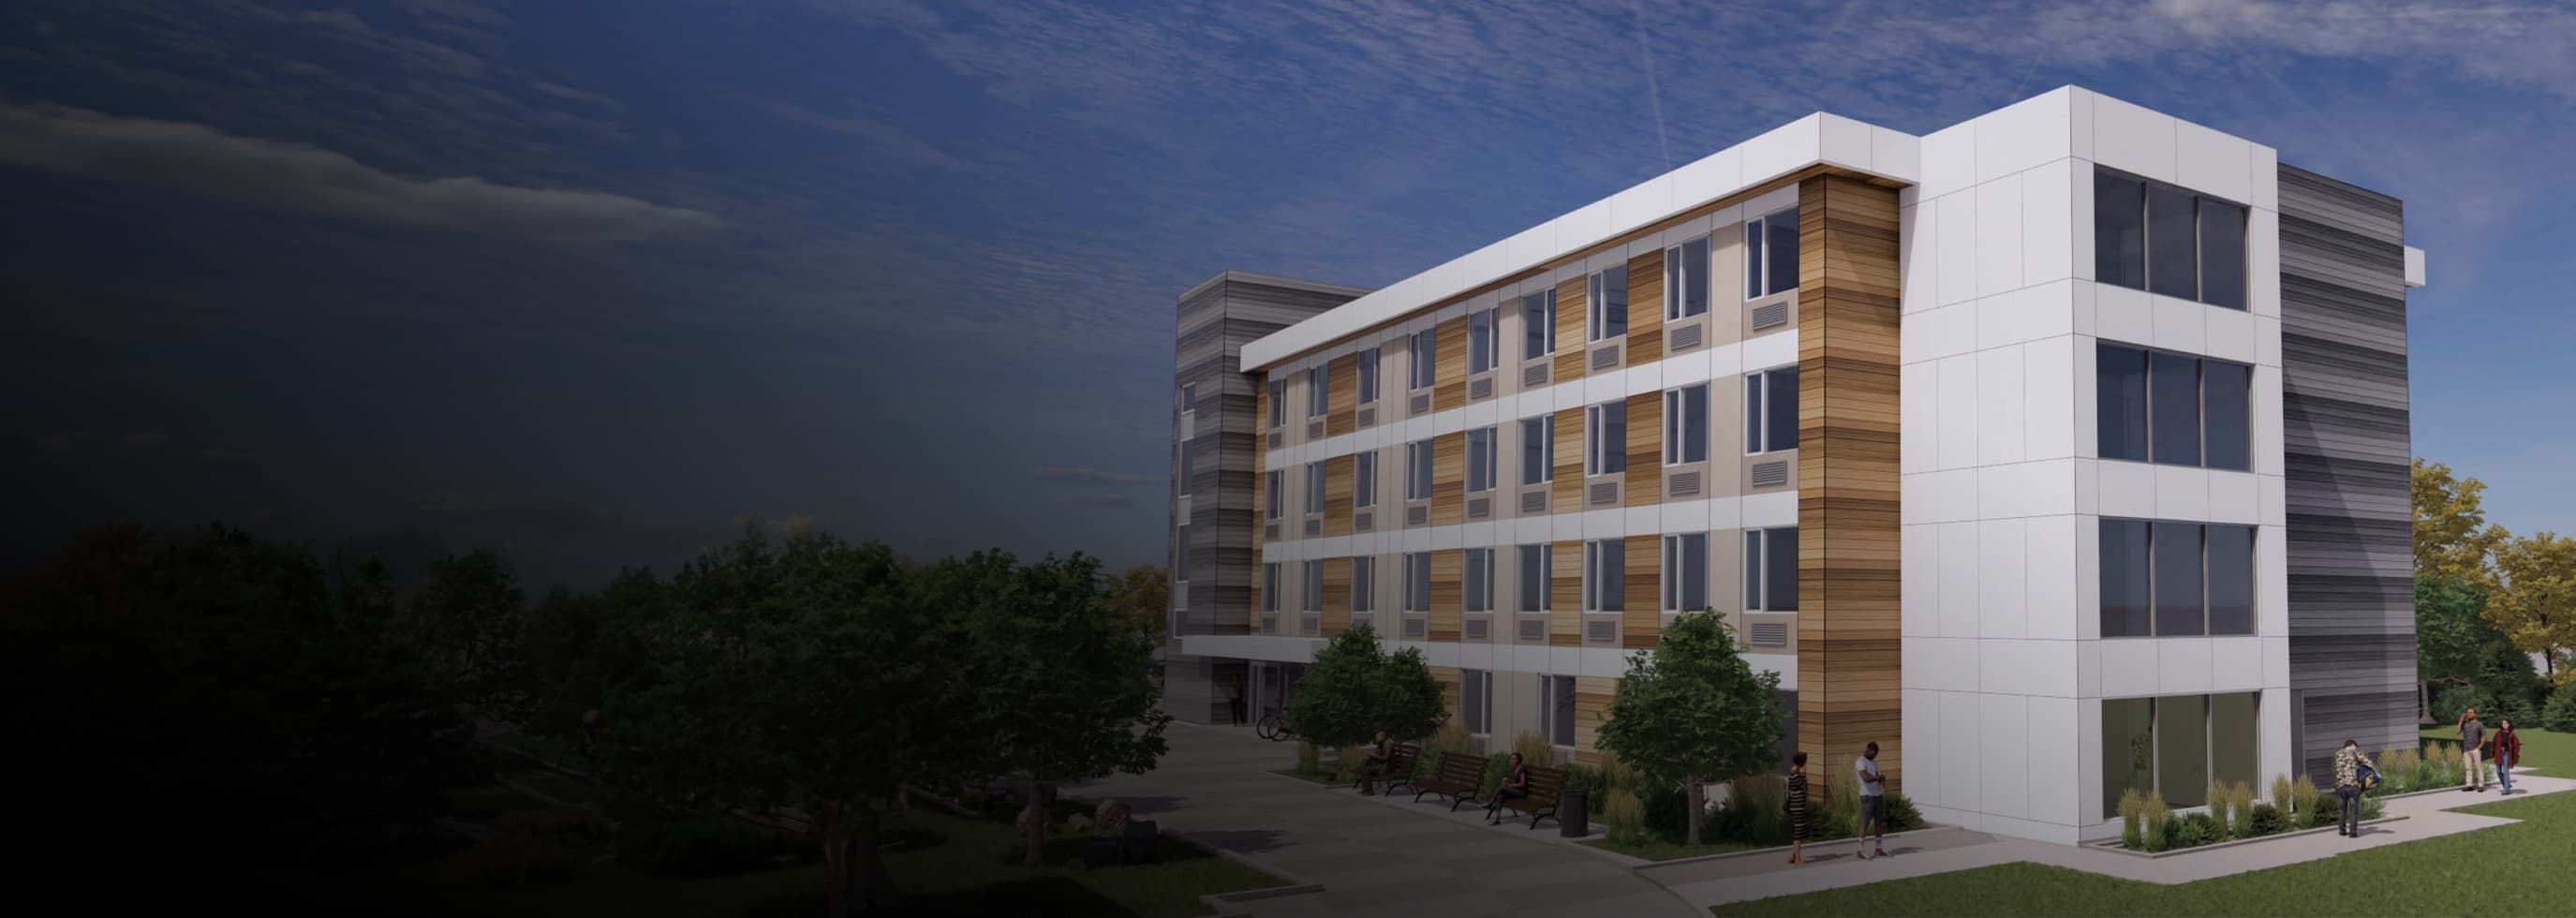 rendering of the exterior view of the new student housing residence in Salmon Arm campus